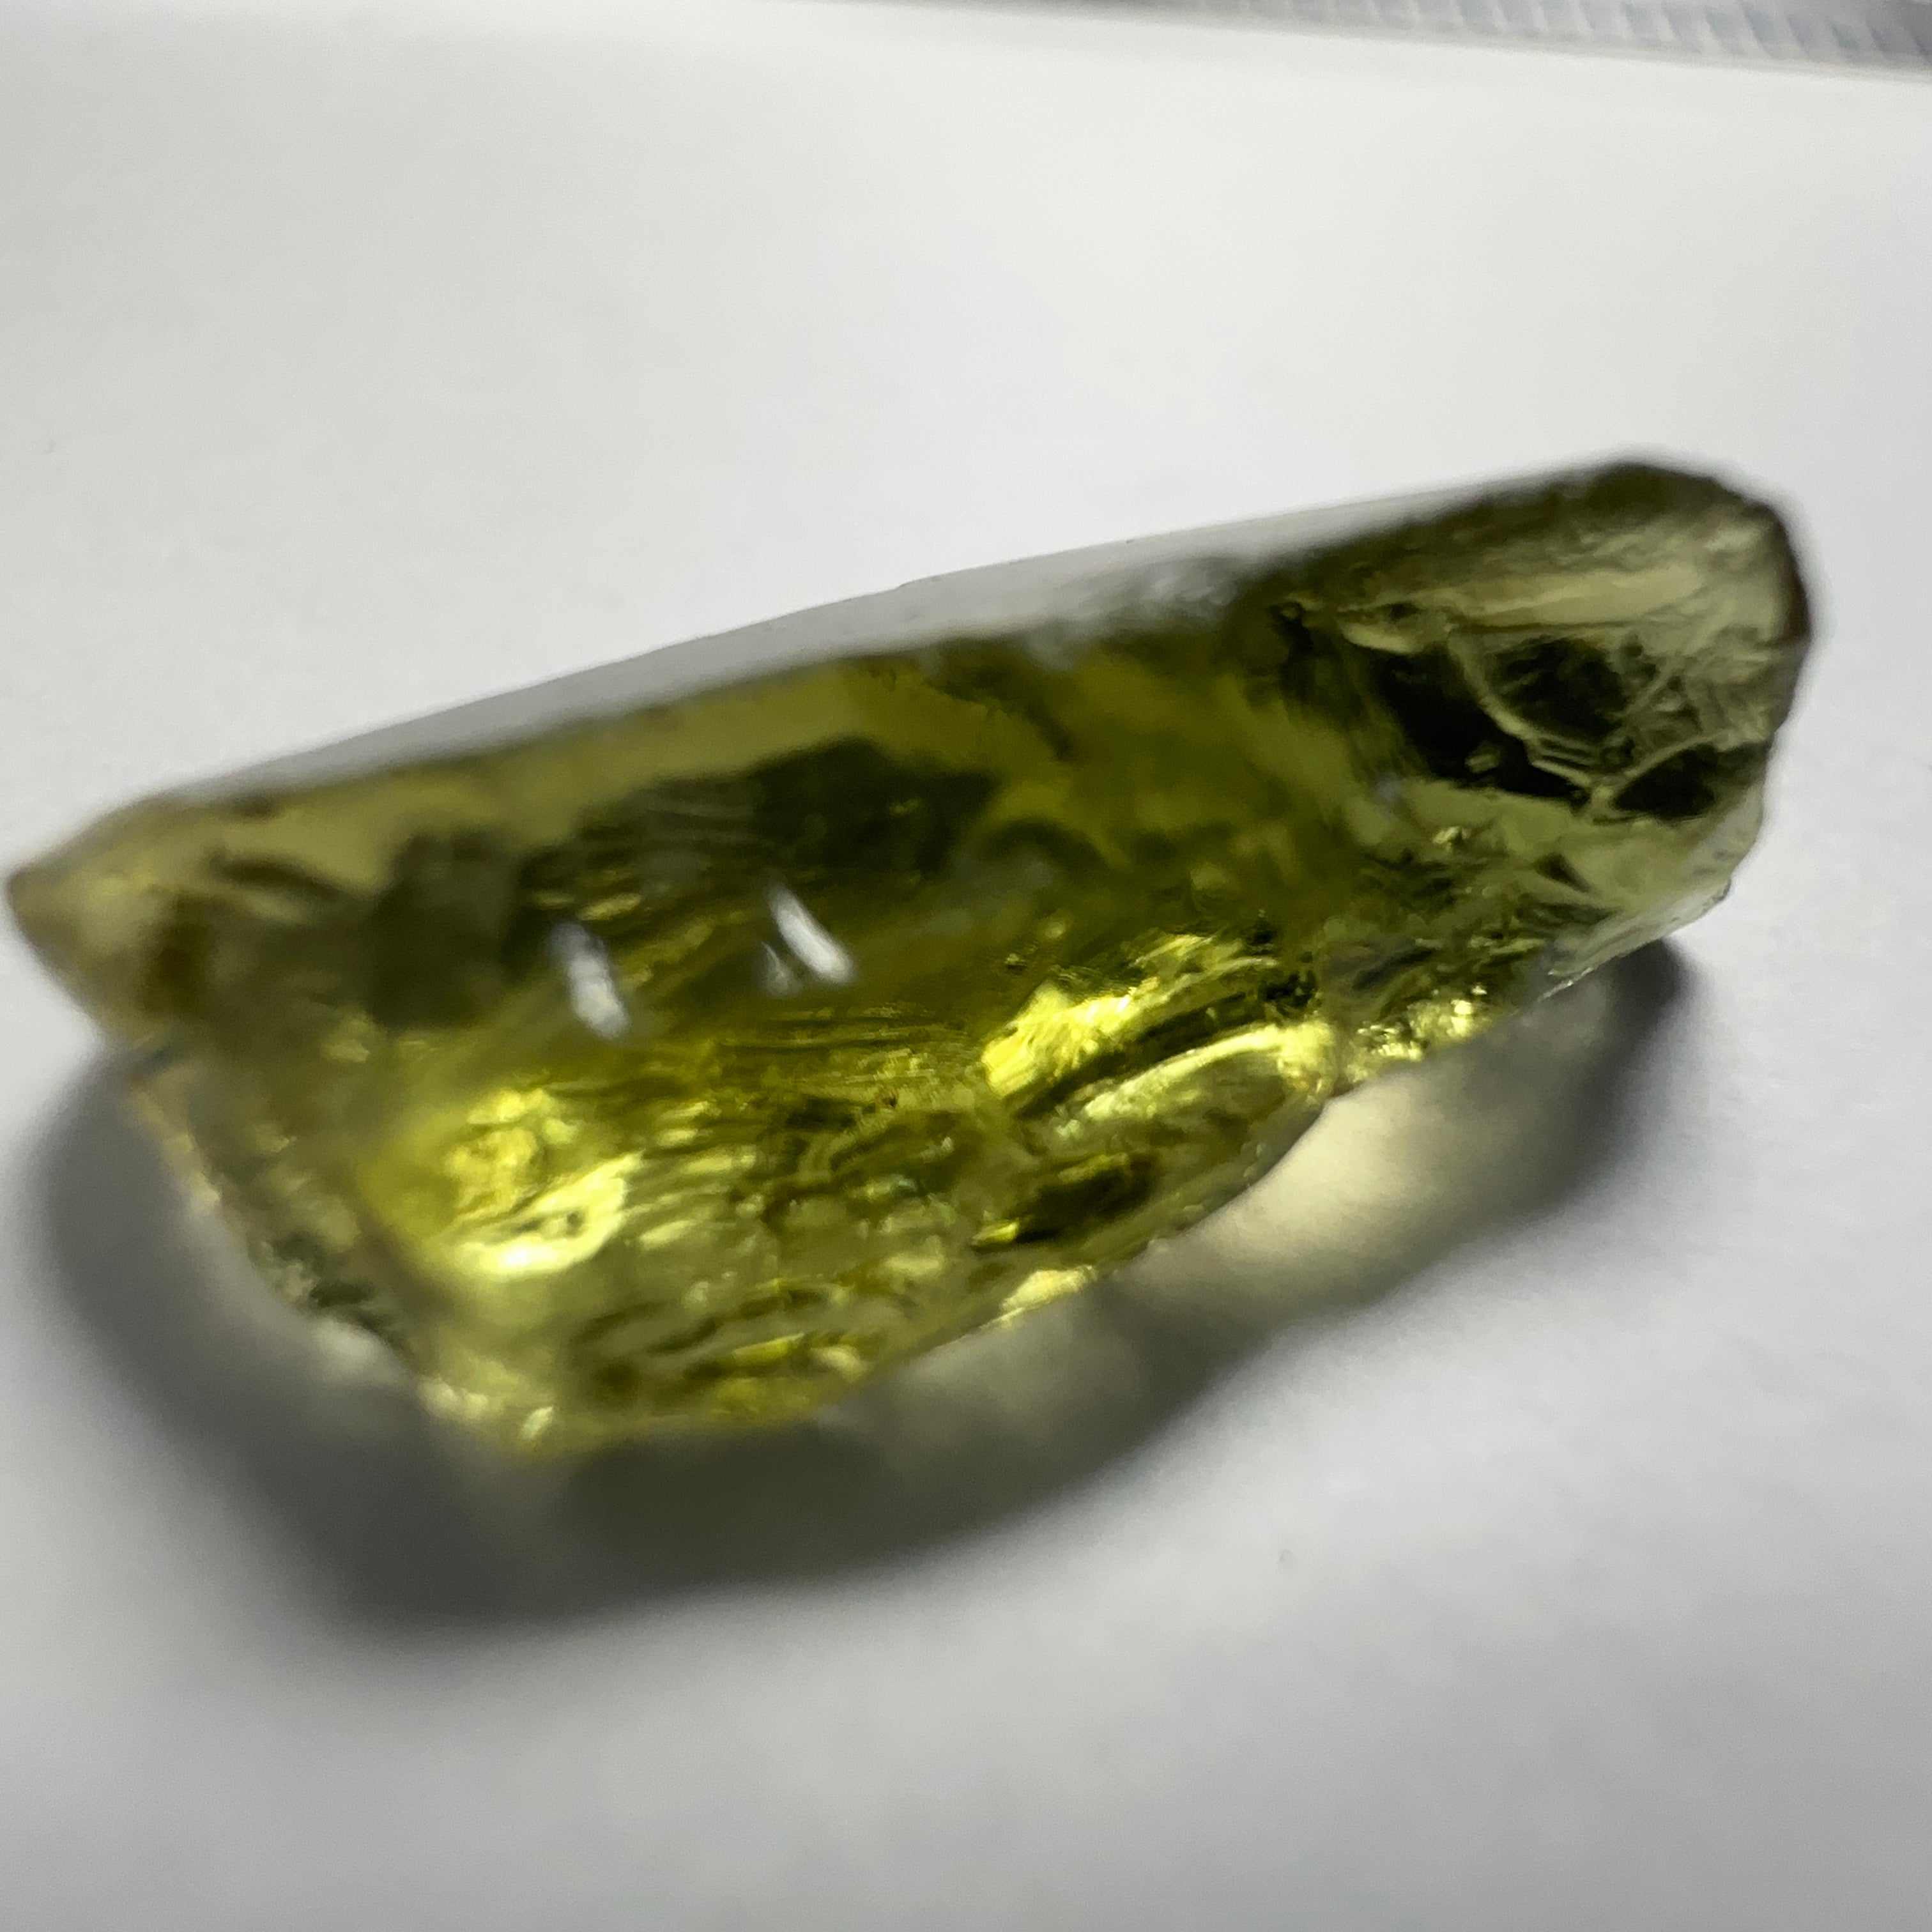 5.37ct Mozambique Tourmaline, VVS-IF, Untreated Unheated.